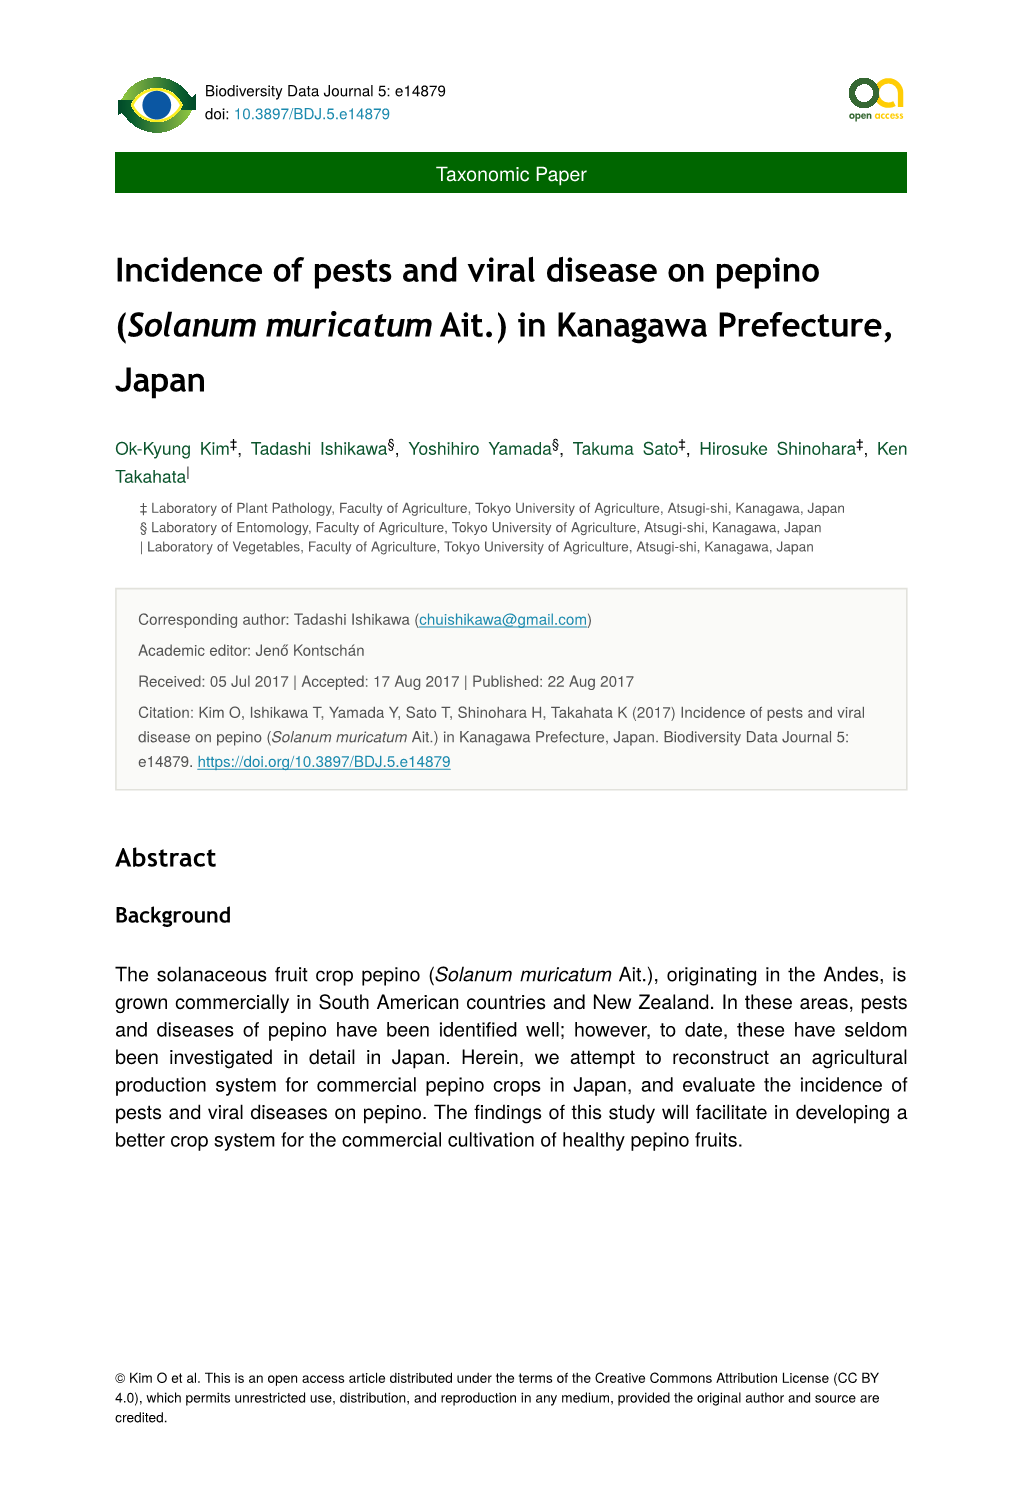 Incidence of Pests and Viral Disease on Pepino (Solanum Muricatum Ait.) in Kanagawa Prefecture, Japan